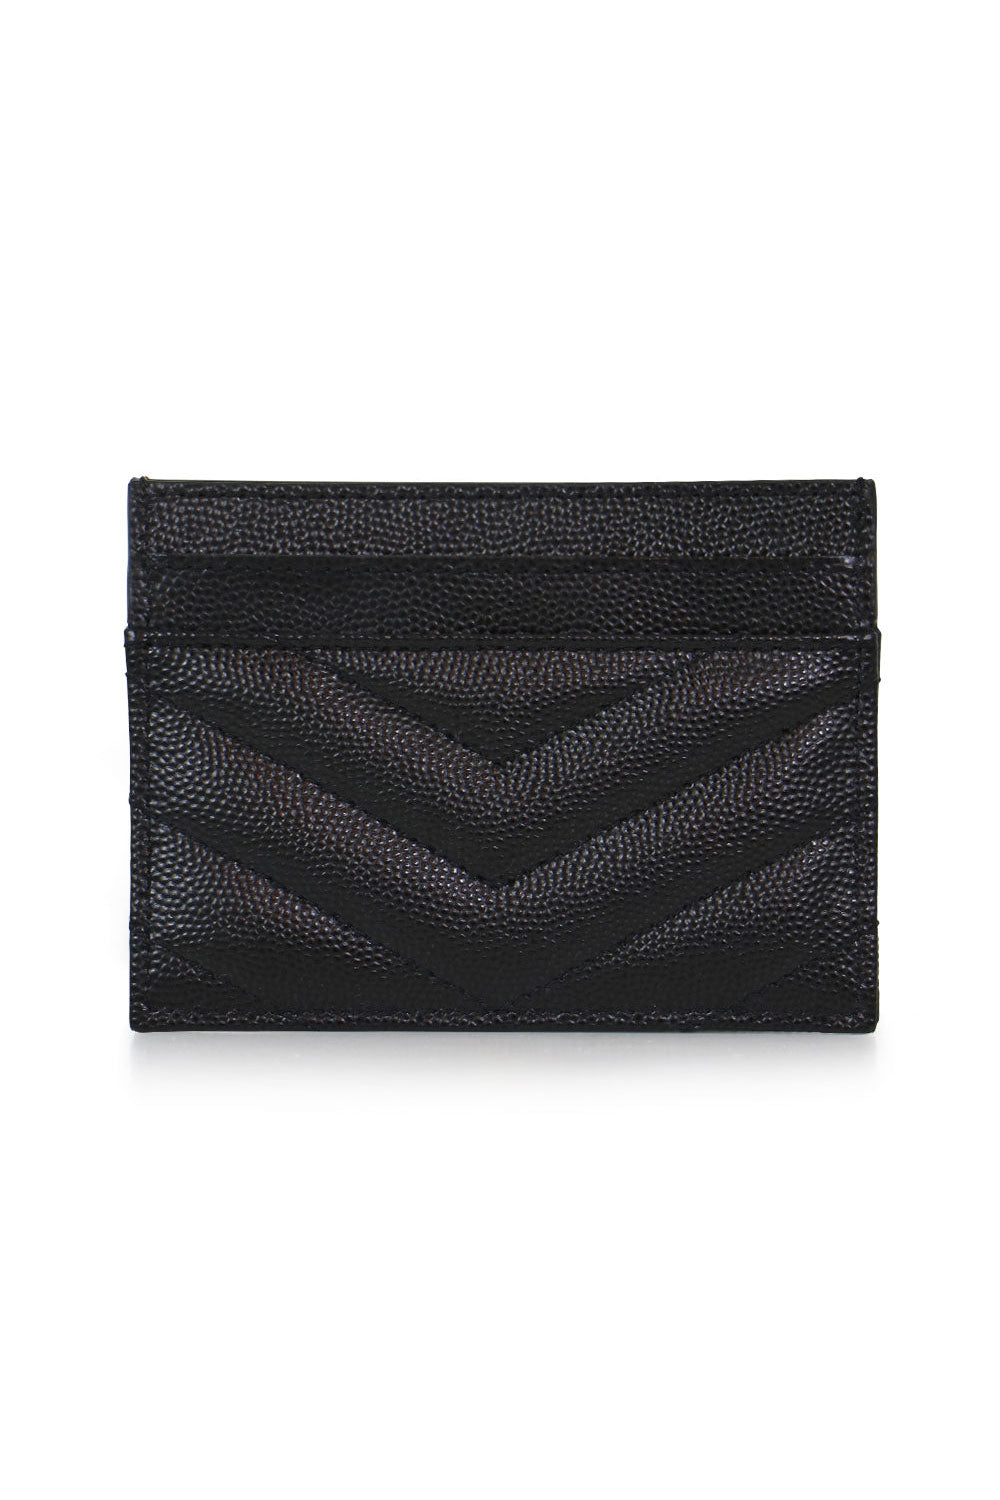 SAINT LAURENT SMALL LEATHER GOODS BLACK MONOGRAMME QUILTED CARDHOLDER | BLACK/SILVER